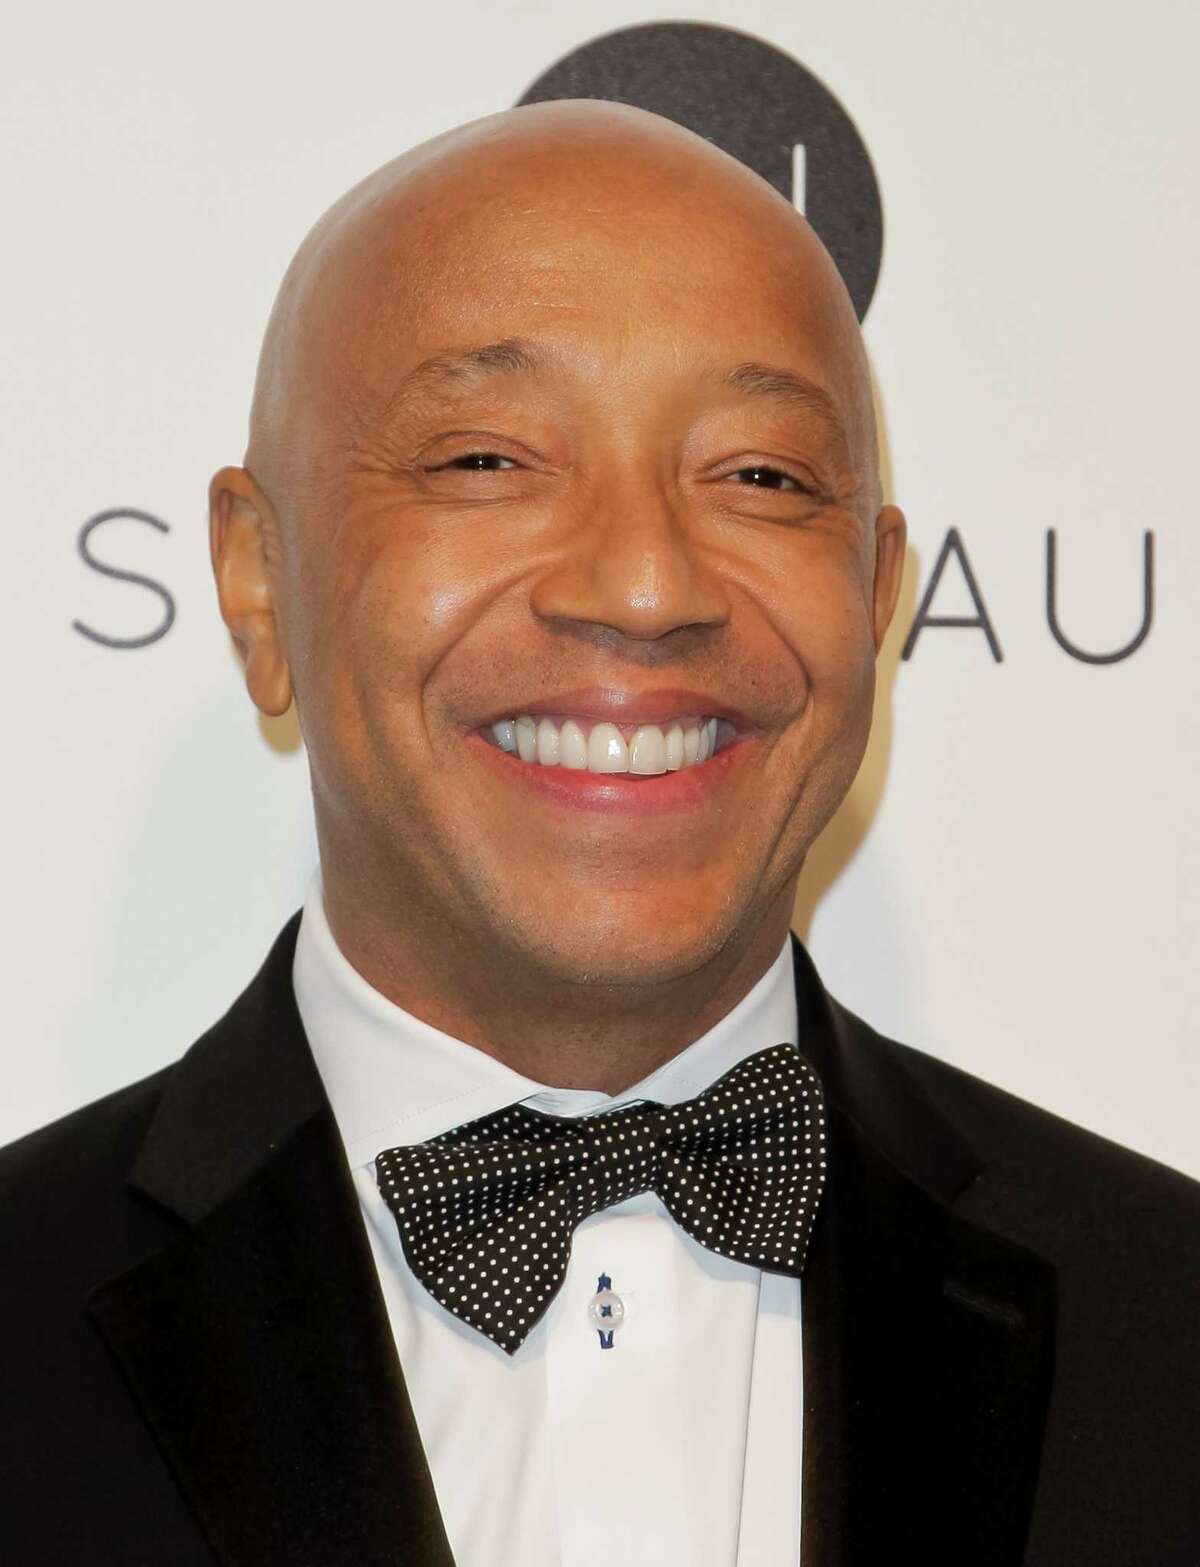 US entrepreneur and producer Russell Simmons poses upon his arrival for the 25th annual Elton John AIDS Foundation's Academy Awards Viewing Party on February 26, 2017 in West Hollywood, California. / AFP PHOTO / TIBRINA HOBSONTIBRINA HOBSON/AFP/Getty Images ORG XMIT: 1